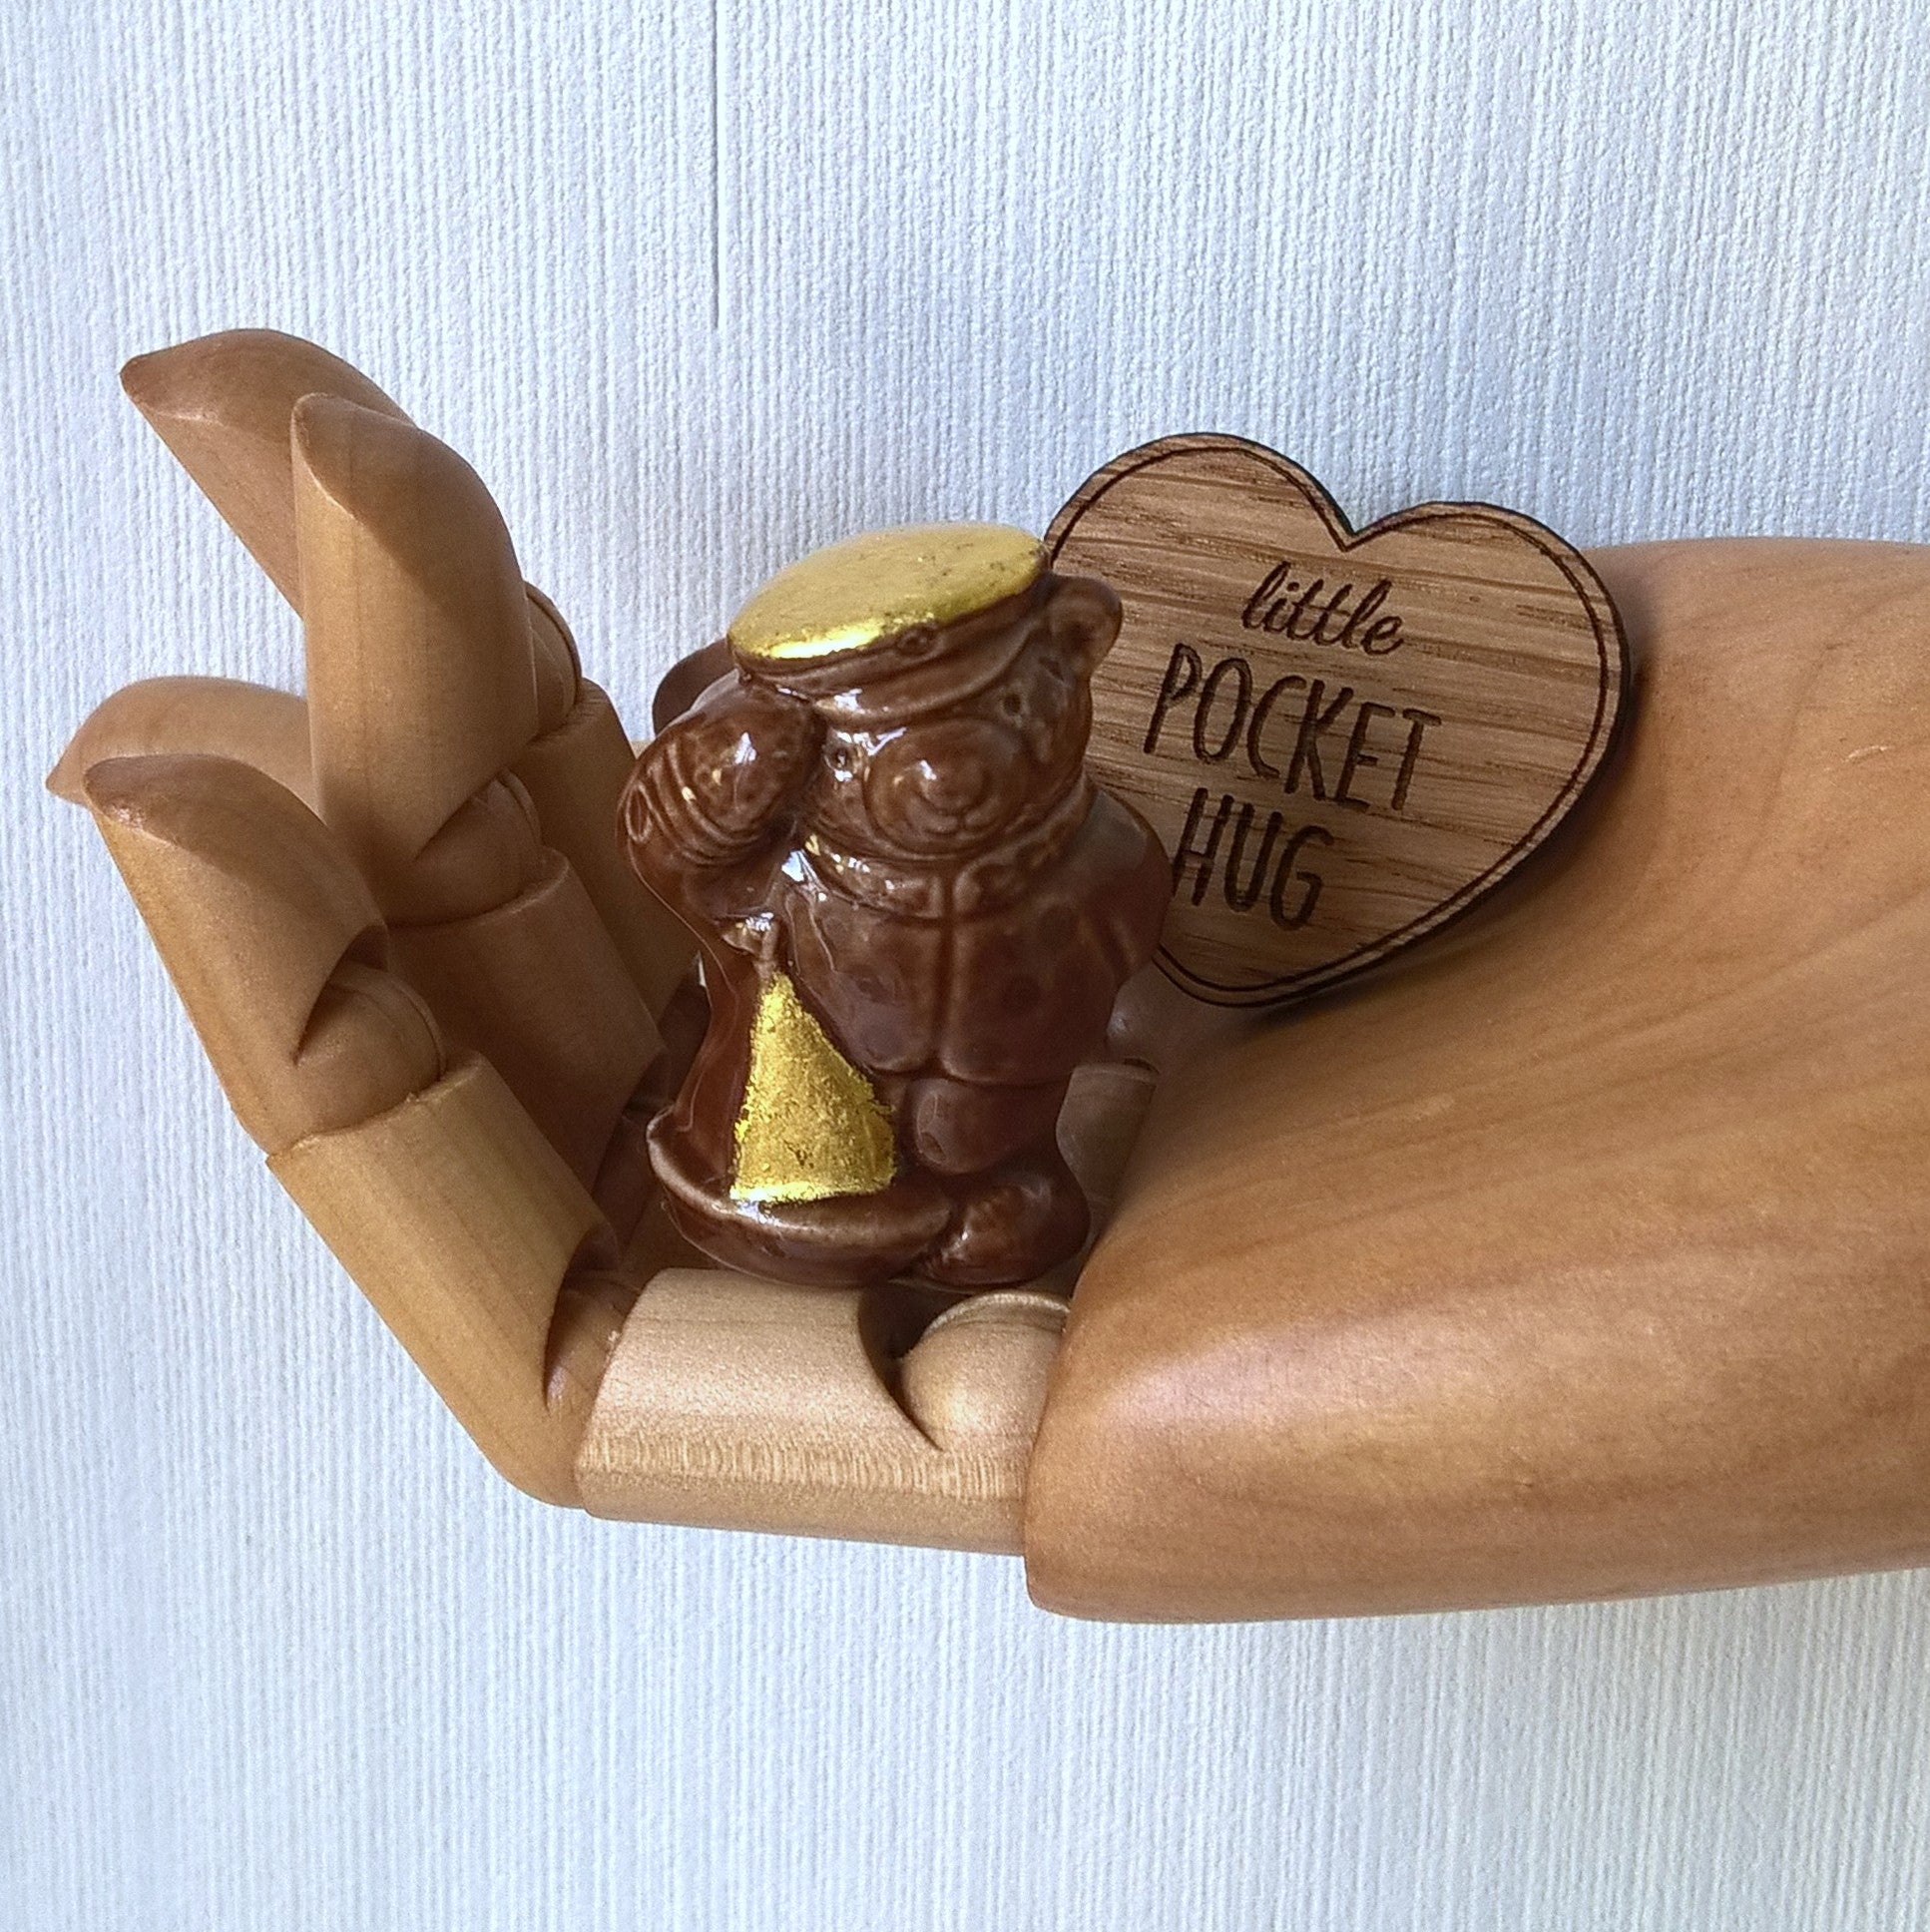 Miniature brown ceramic sailor bear fits into the palm of a hand, along with the wooden heart pocket hug 